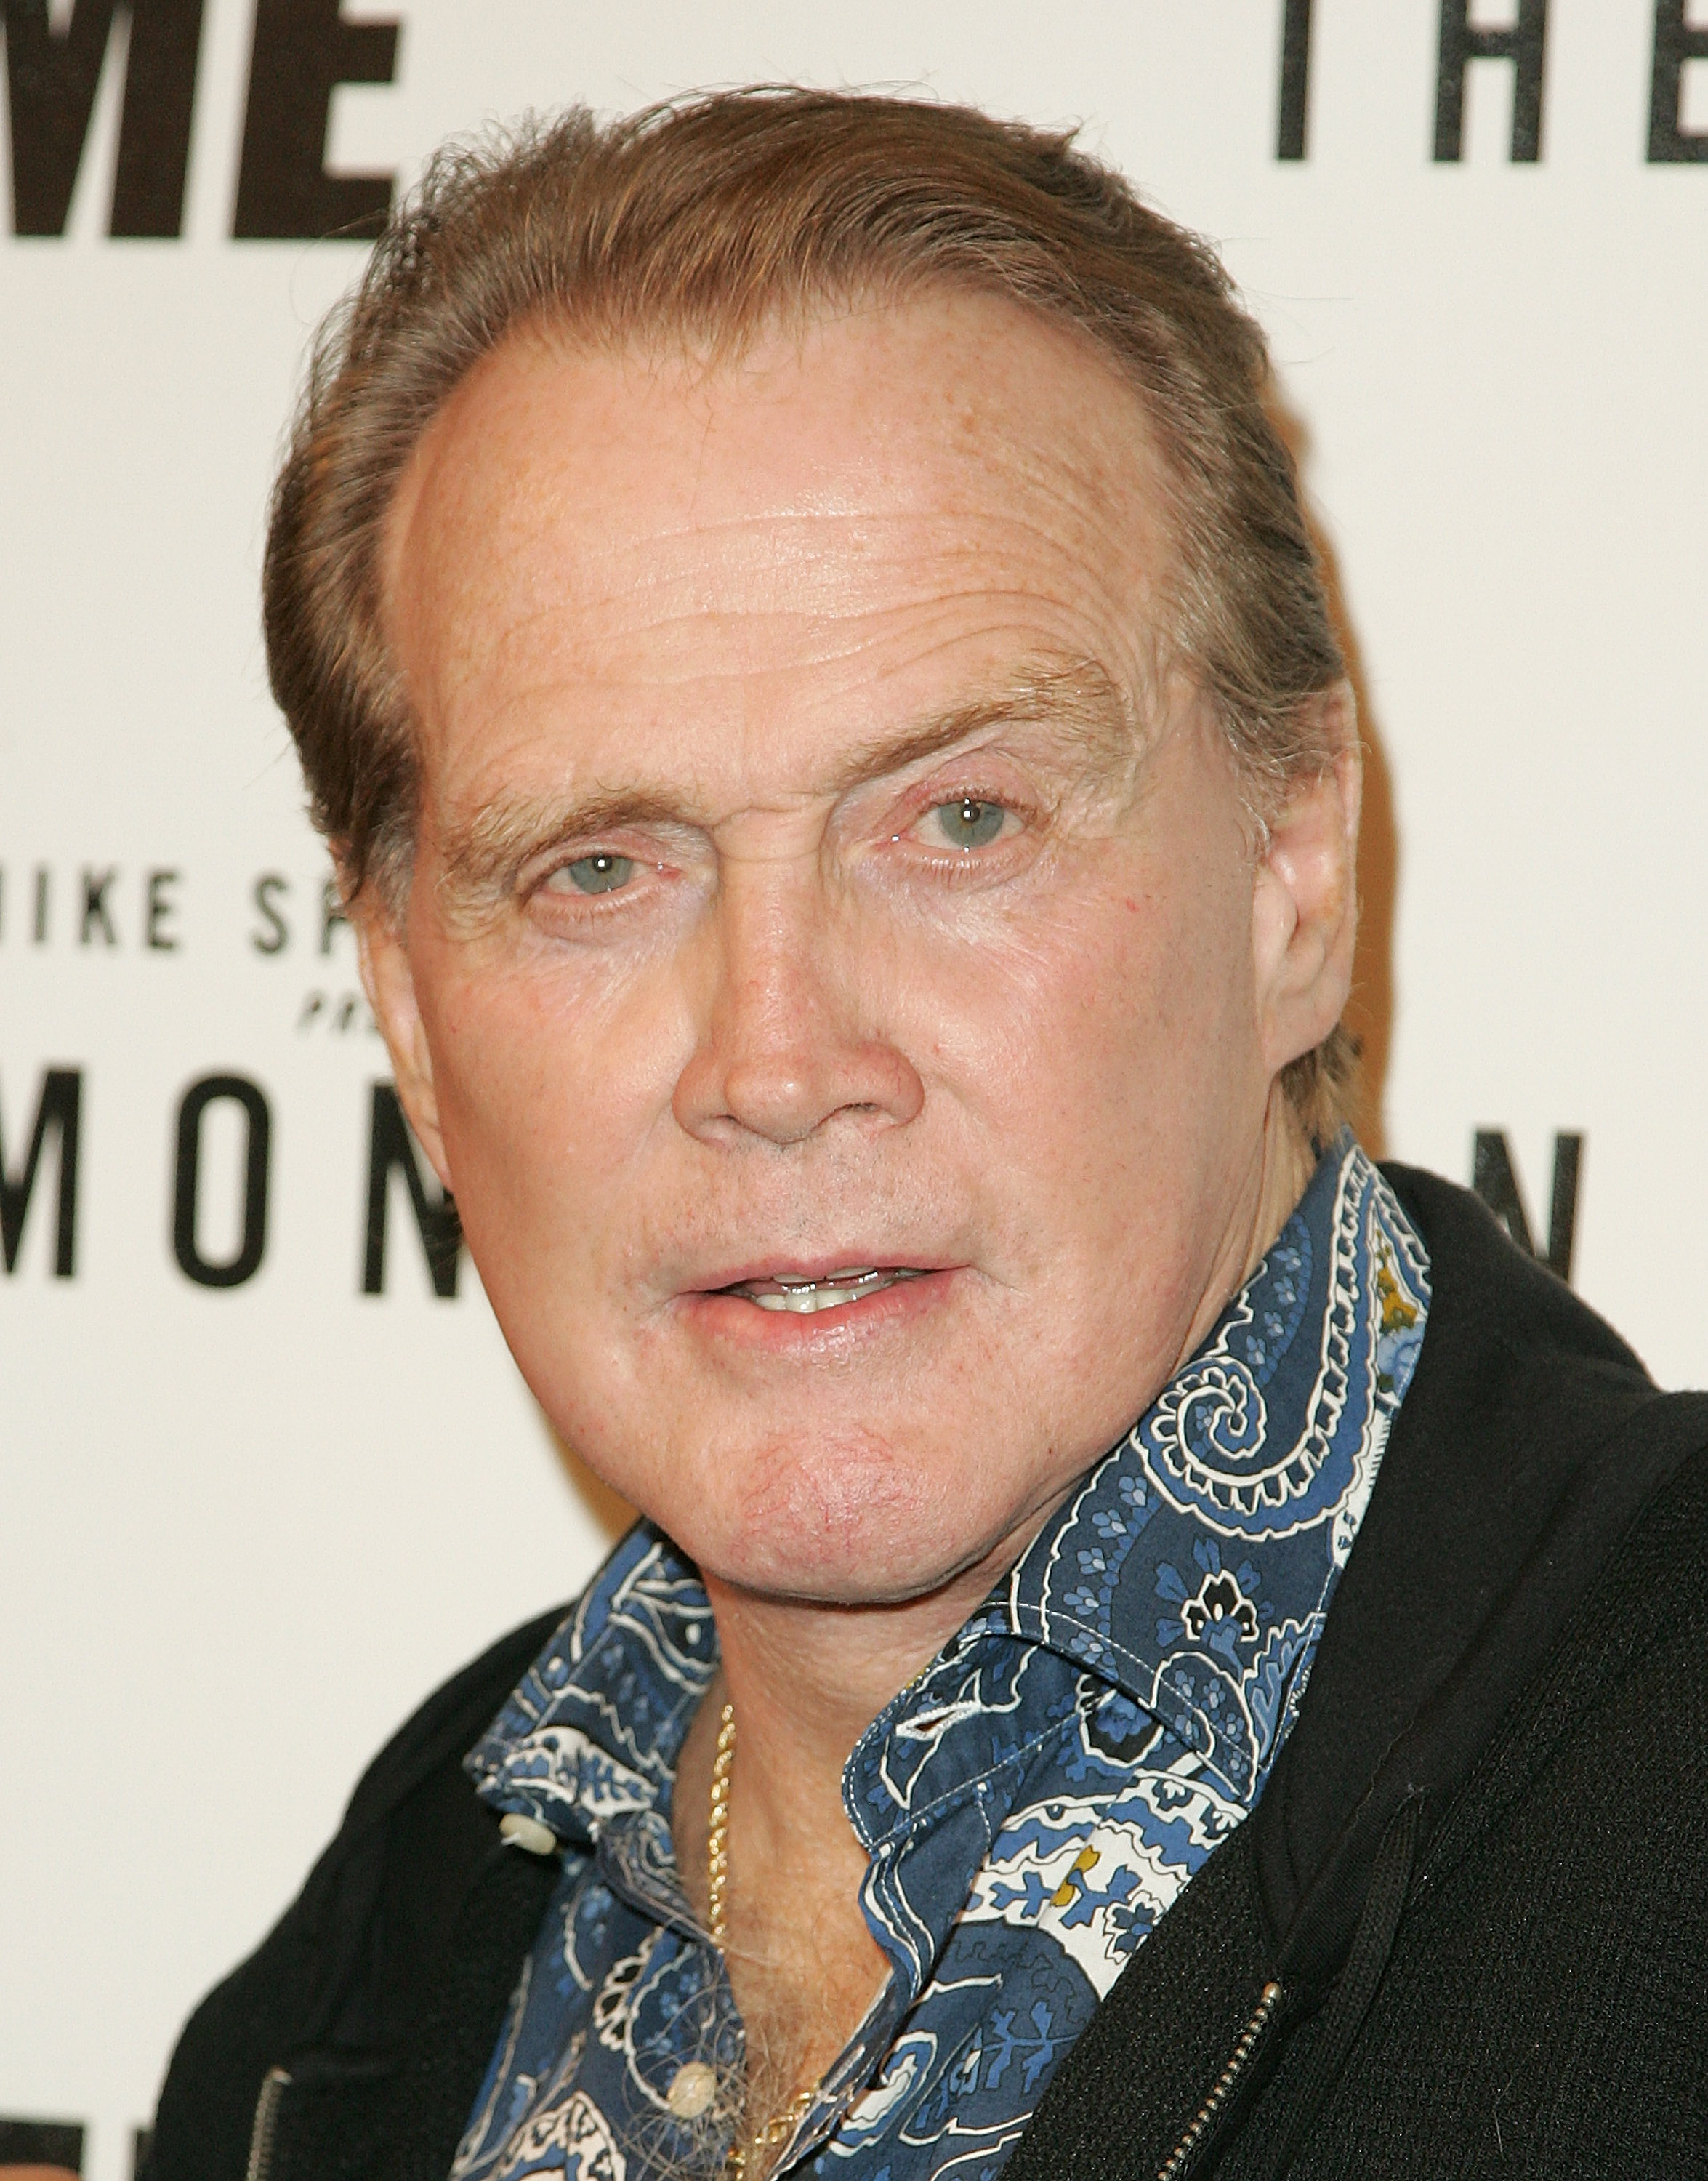 Lee Majors at "The Game" premiere party on September 27, 2008, in Hollywood, California | Source: Getty Images